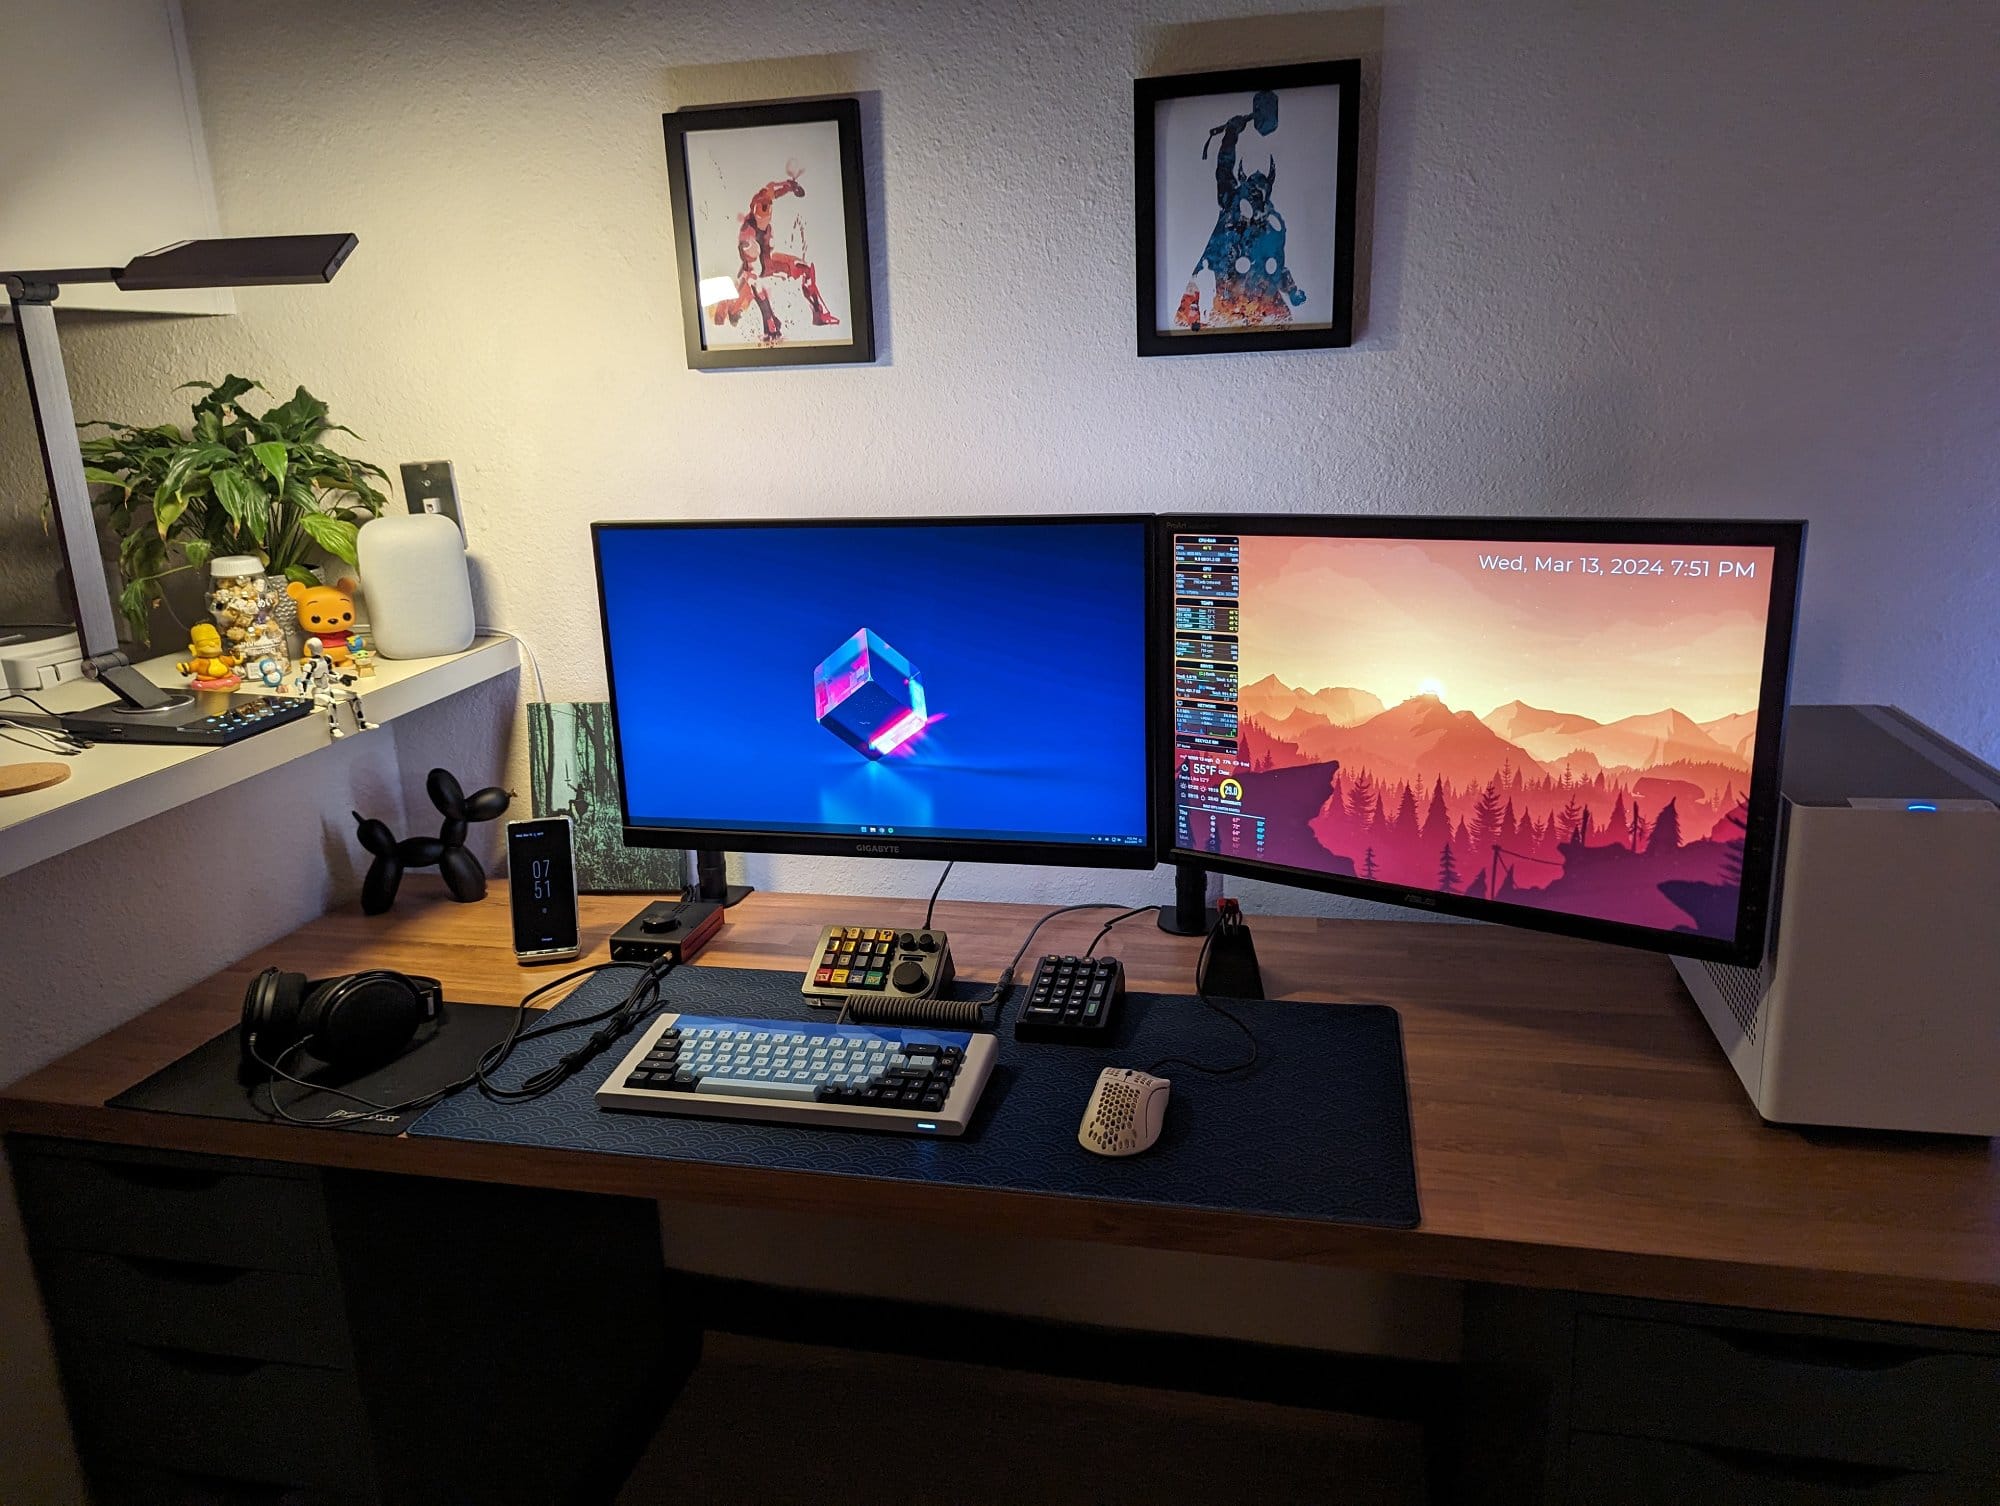 An organised desk with a computer sporting dual monitors with colorful wallpapers, a mechanical keyboard, headphones, and a shelf with plants and figurines, all under warm ambient lighting